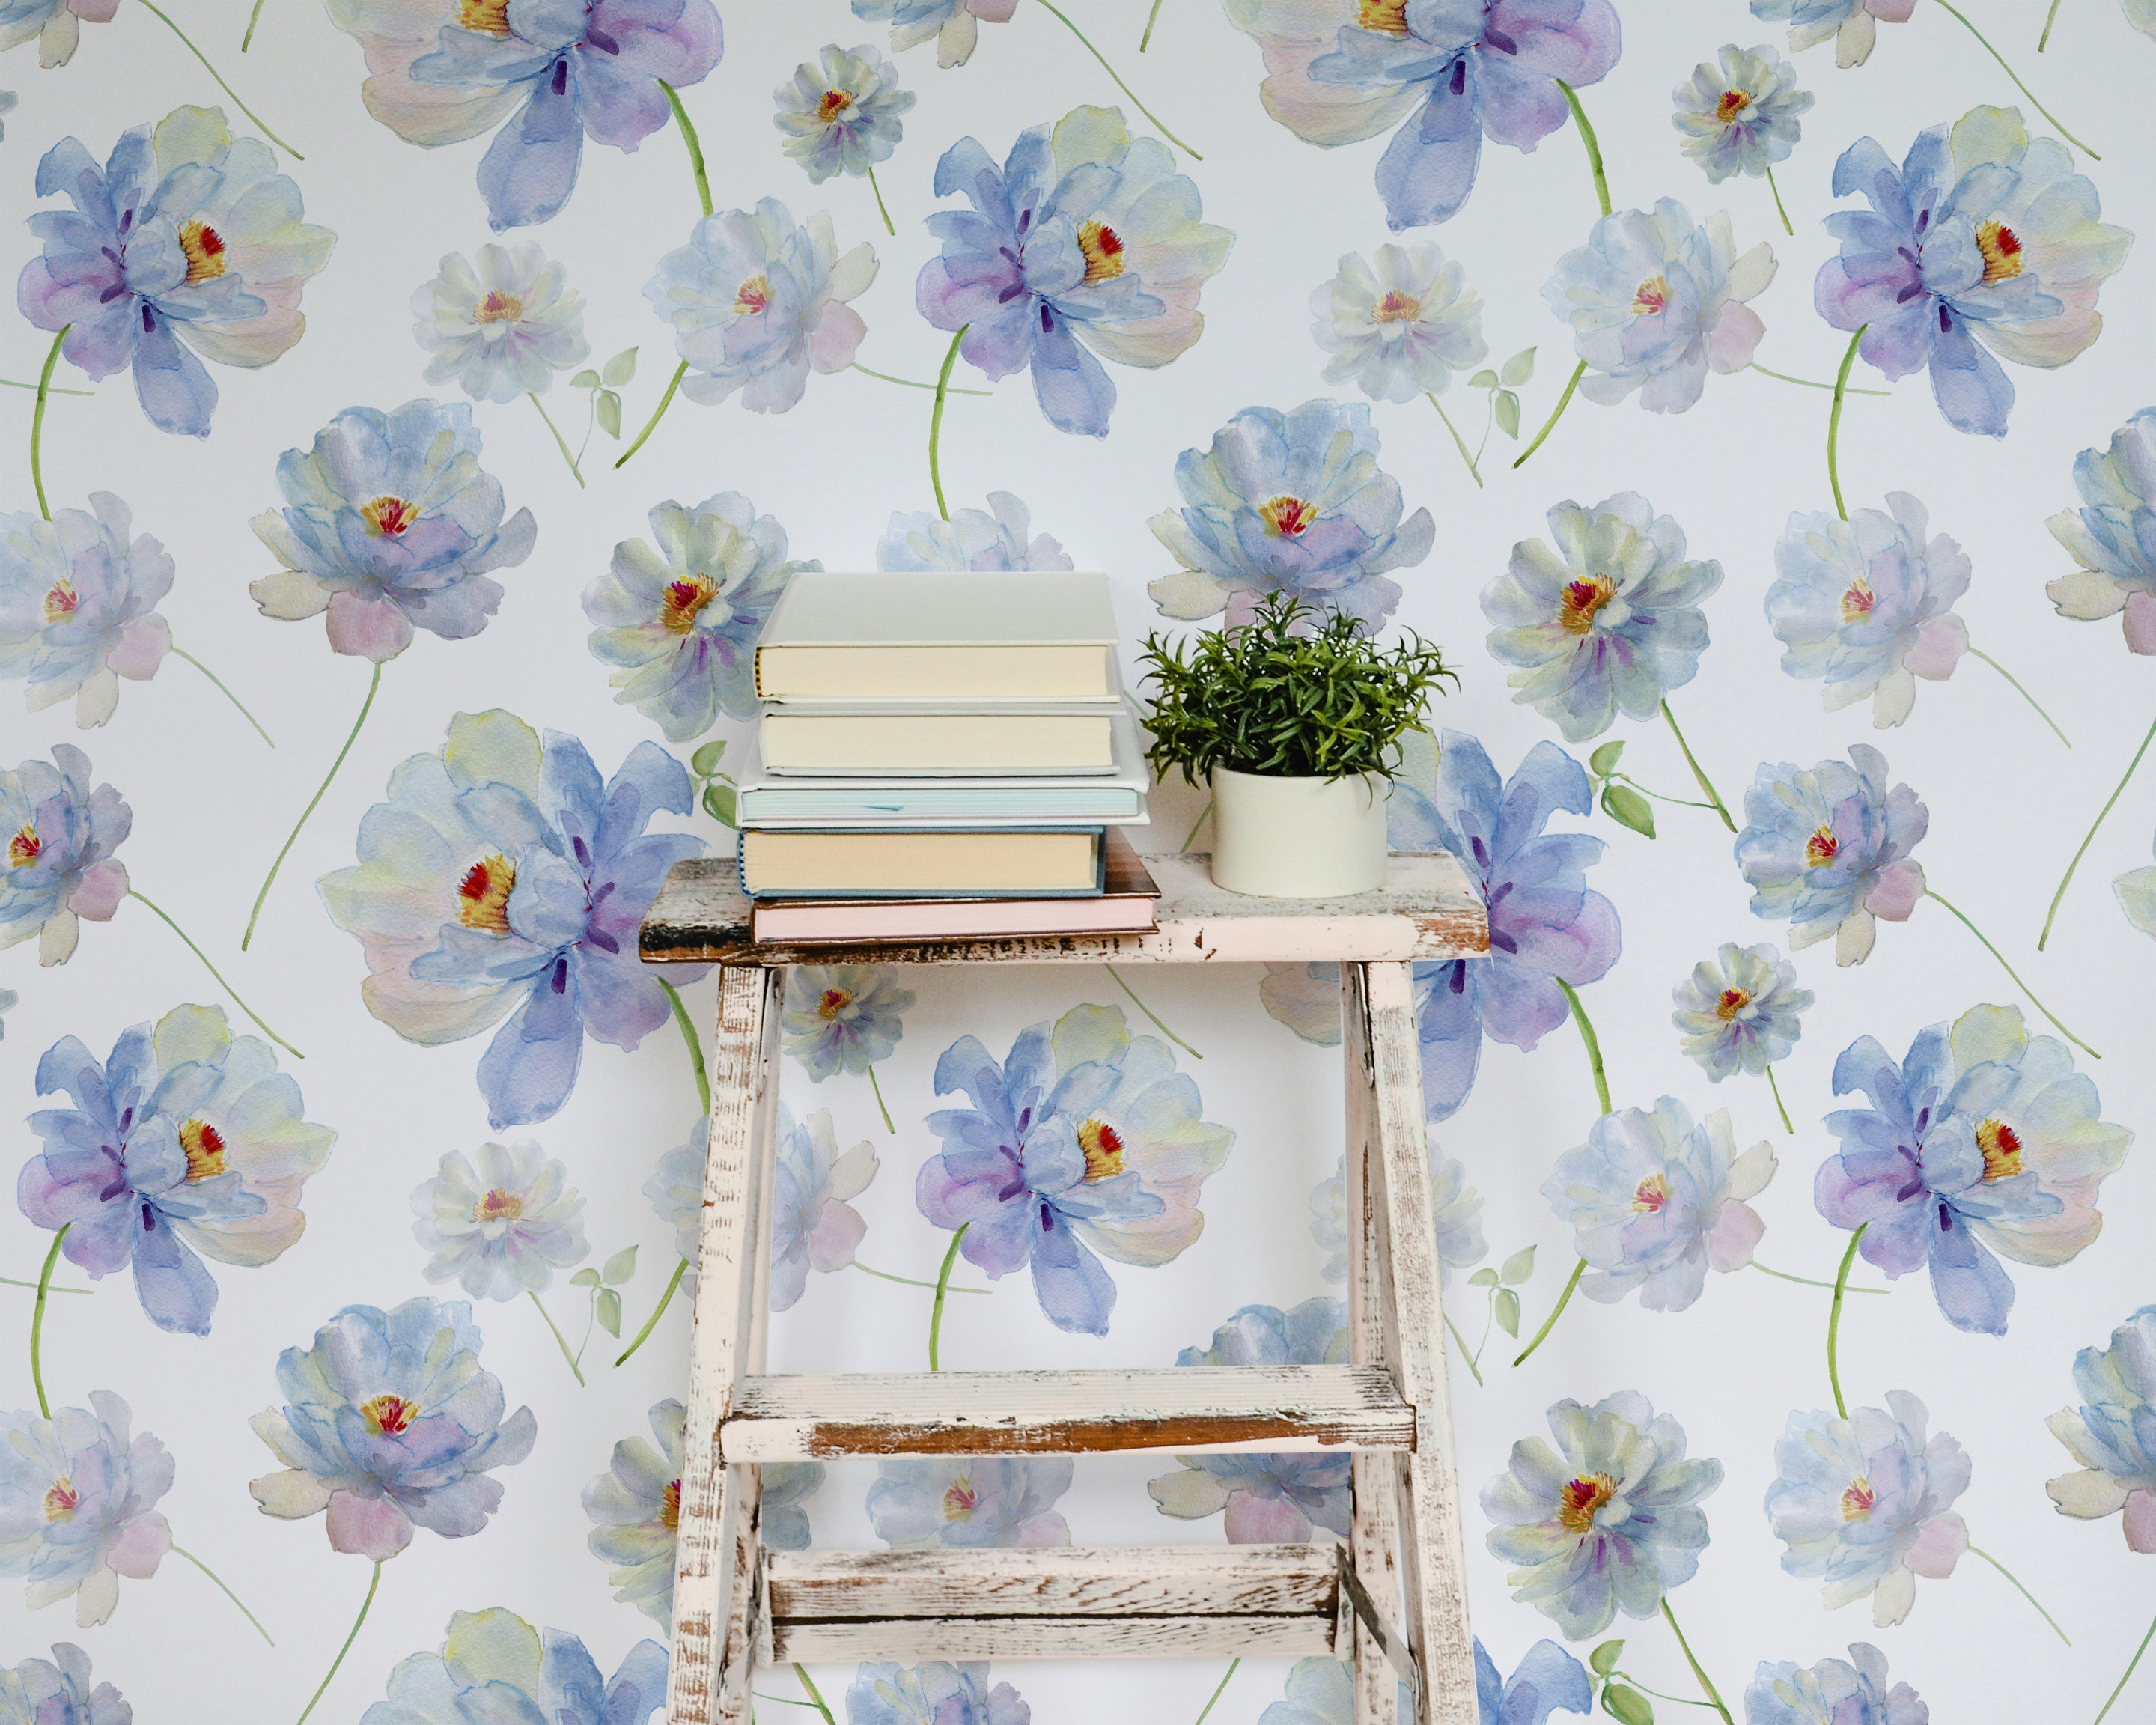 Cozy reading nook decorated with Watercolour Bliss Wallpaper, featuring large watercolor flowers. The setting includes an old white wooden ladder used as a shelf holding books and a small potted plant, adding a rustic charm to the floral decor